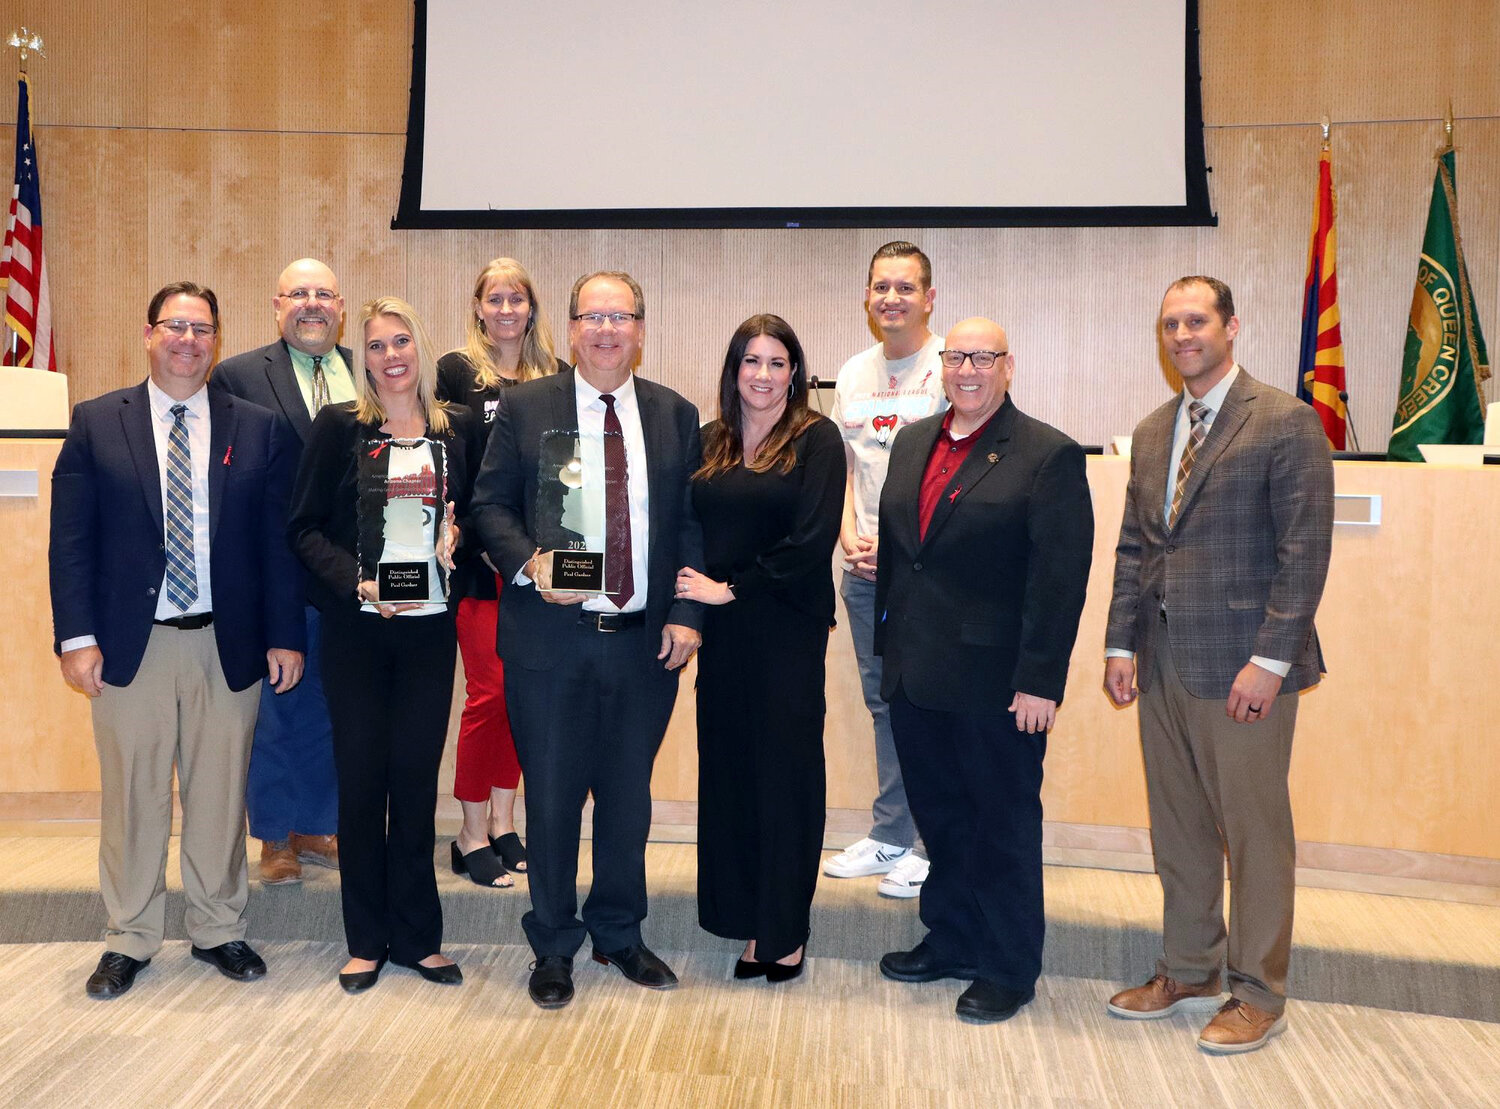 State group recognizes Queen Creek's Paul Gardner | Daily Independent